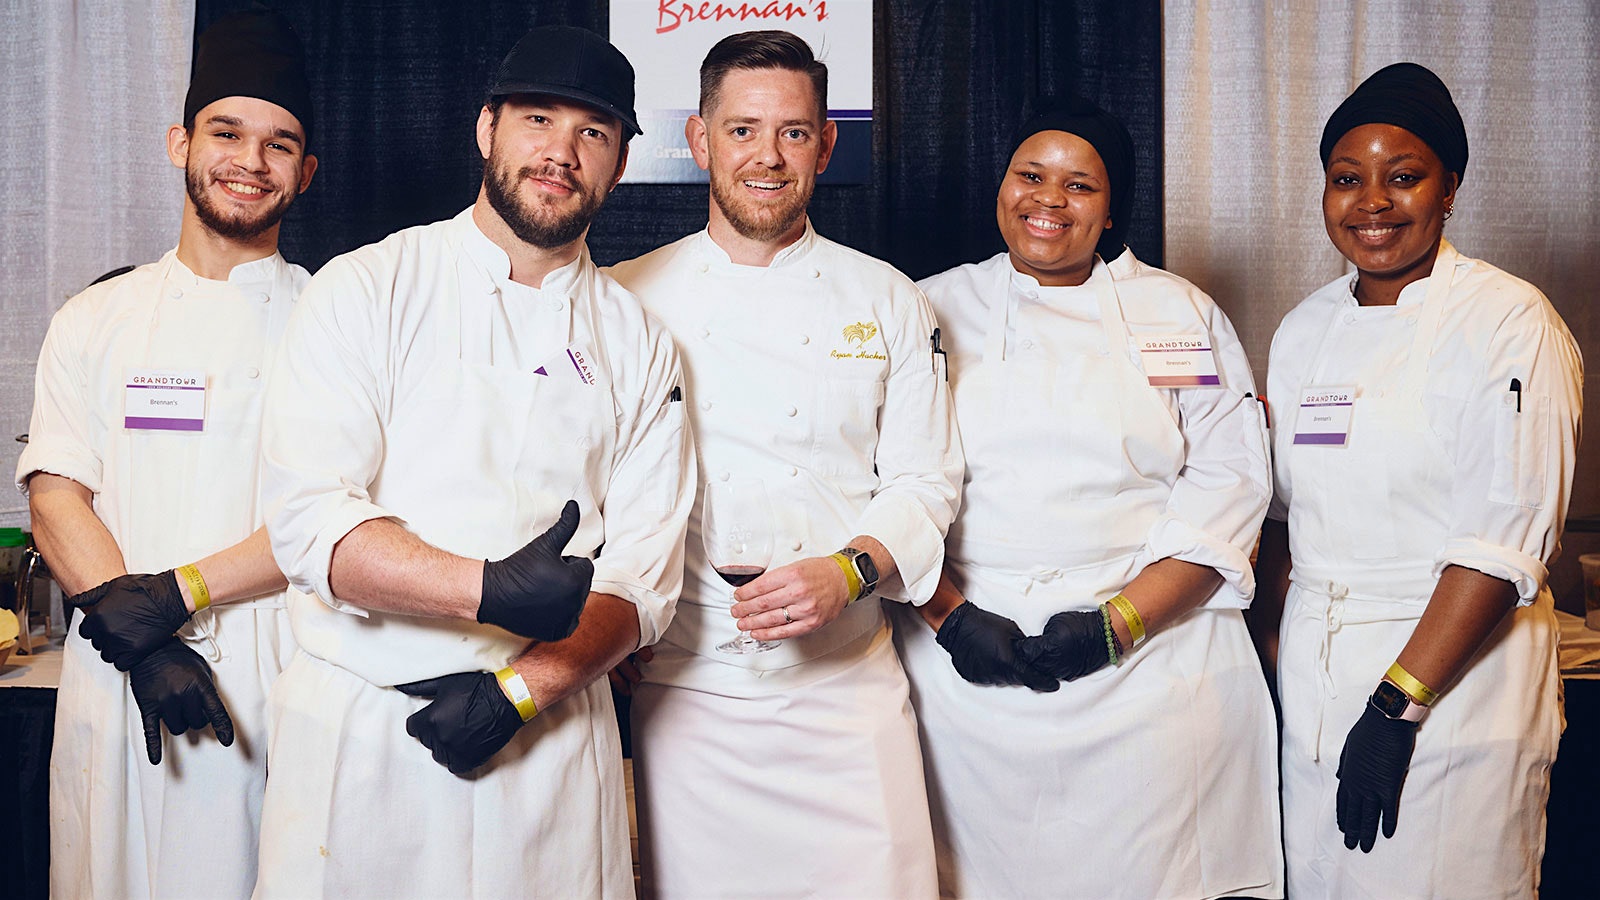  Brennan’s chef Ryan Hacker, center, and his team at the Wine Spectator Grand Tour in New Orleans.